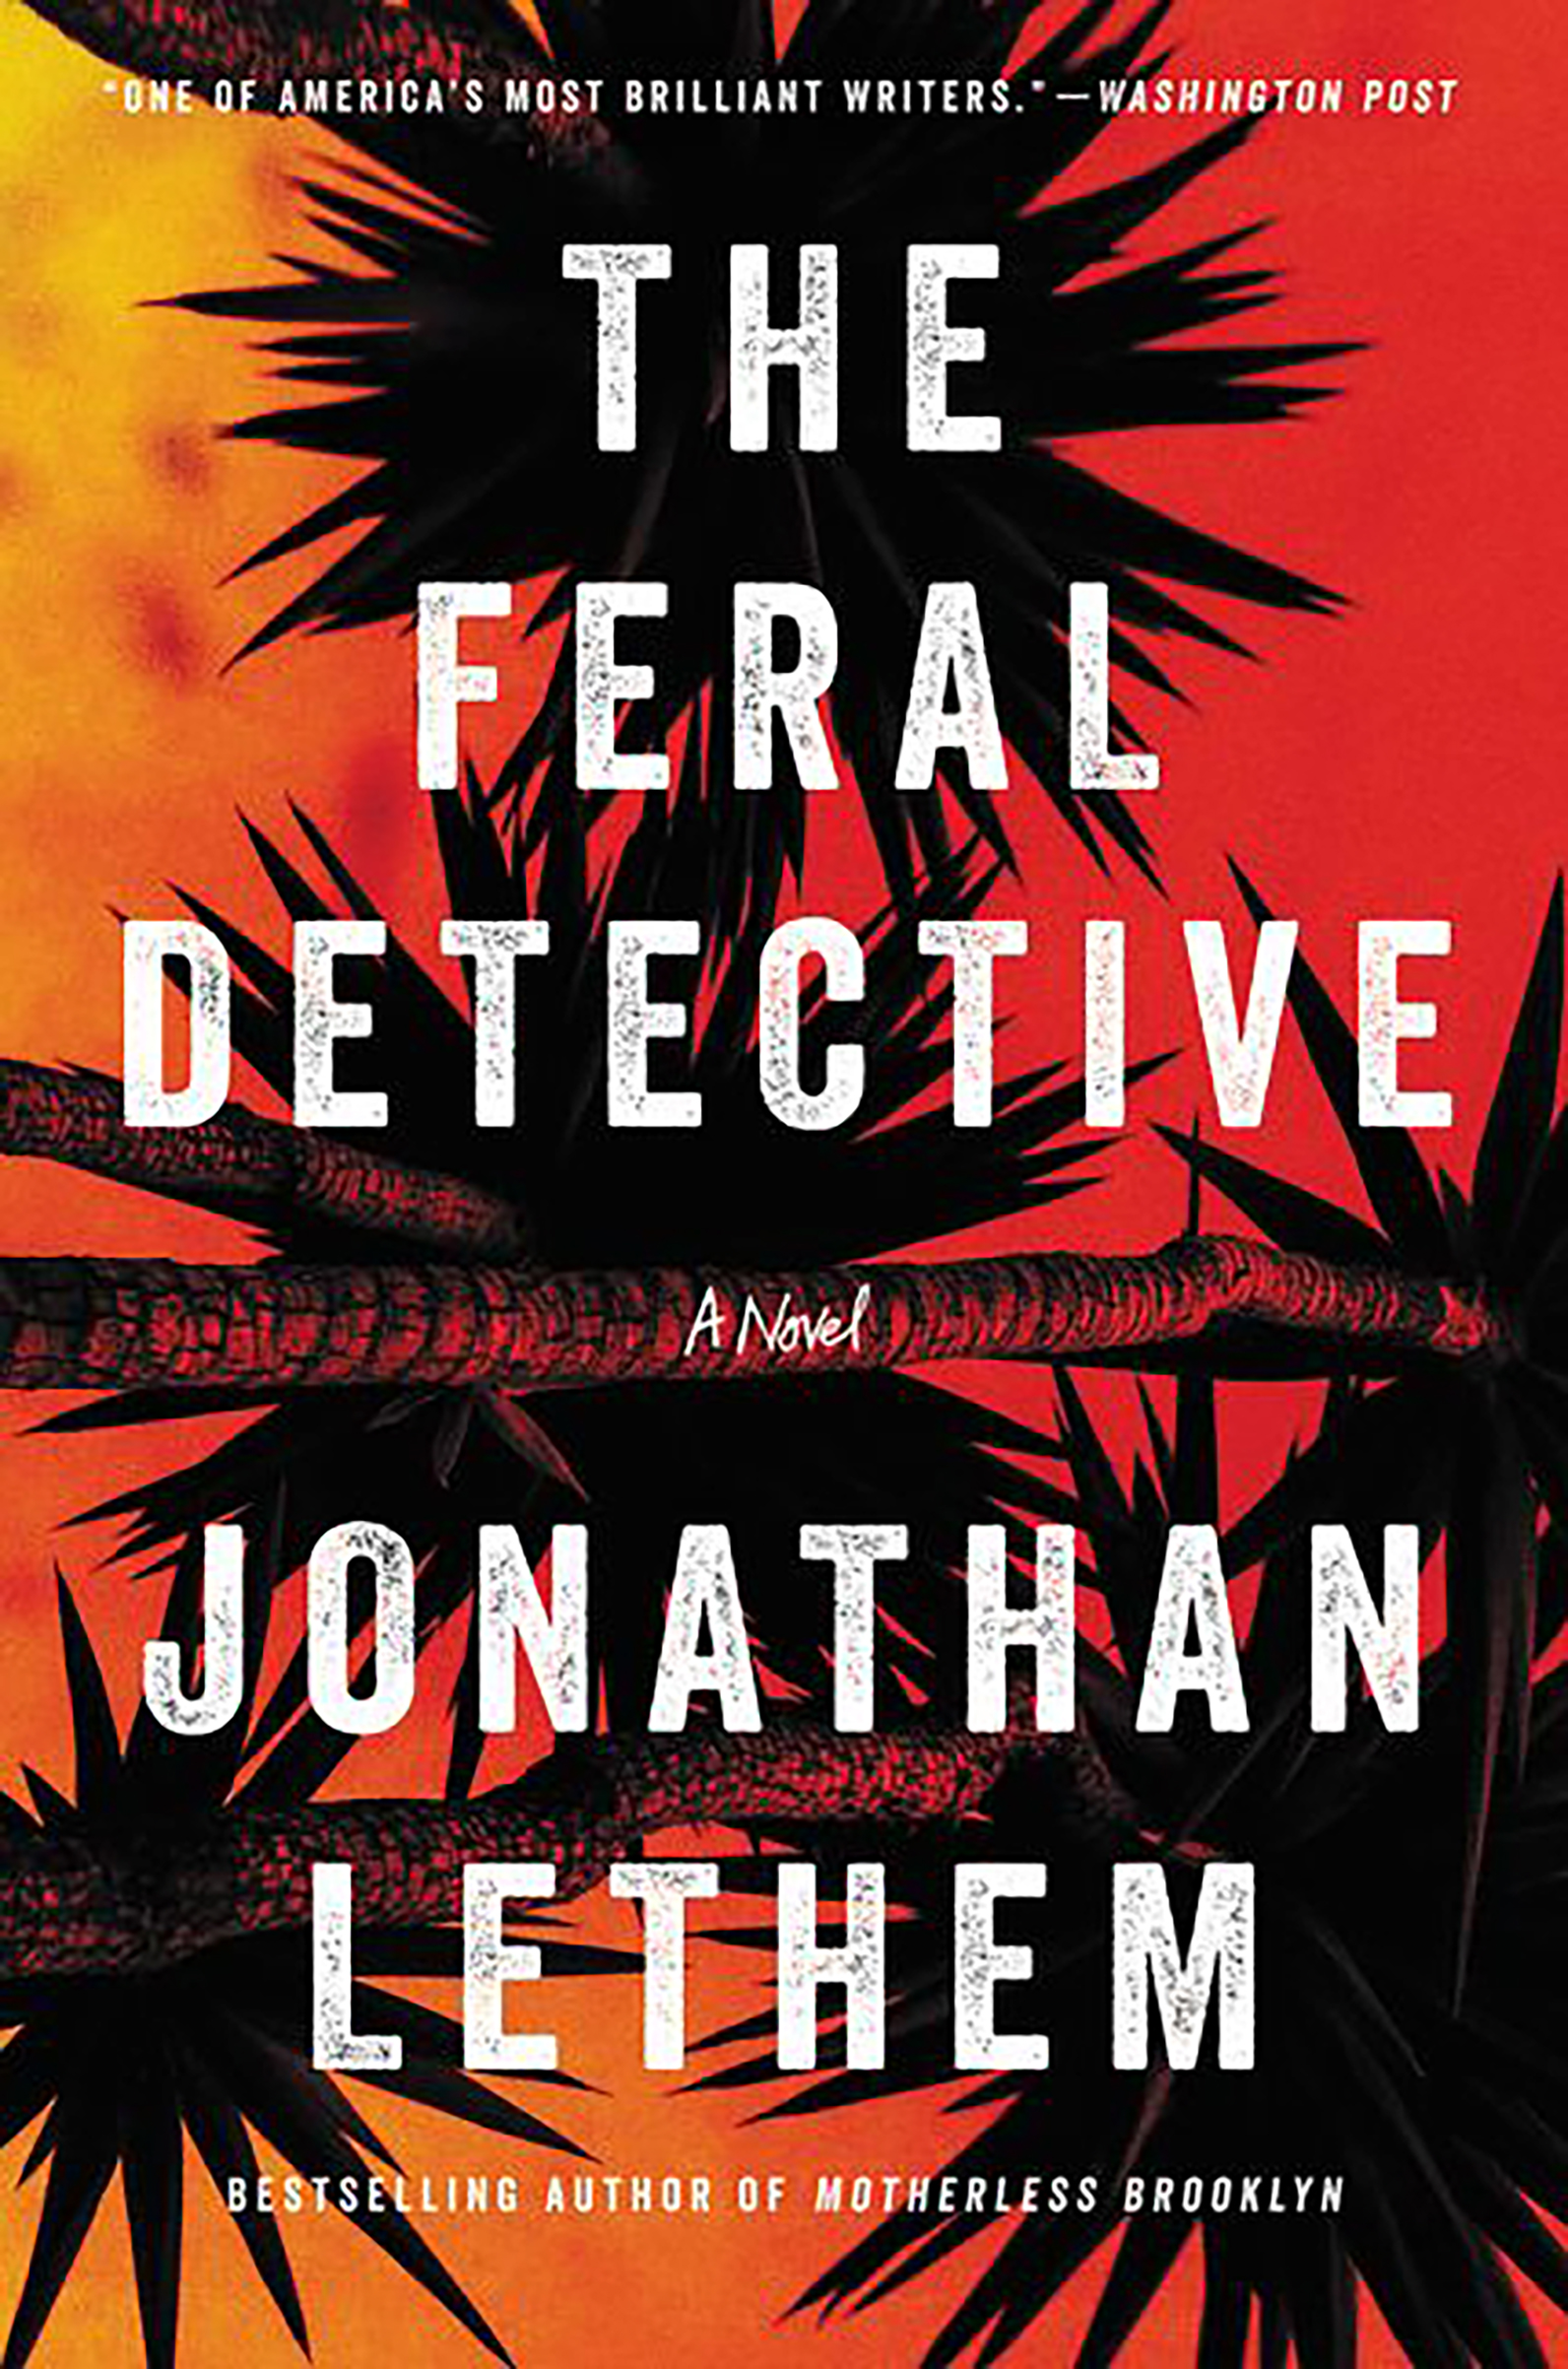 Lethem returns to detective fiction two decades after his hit Motherless Brooklyn